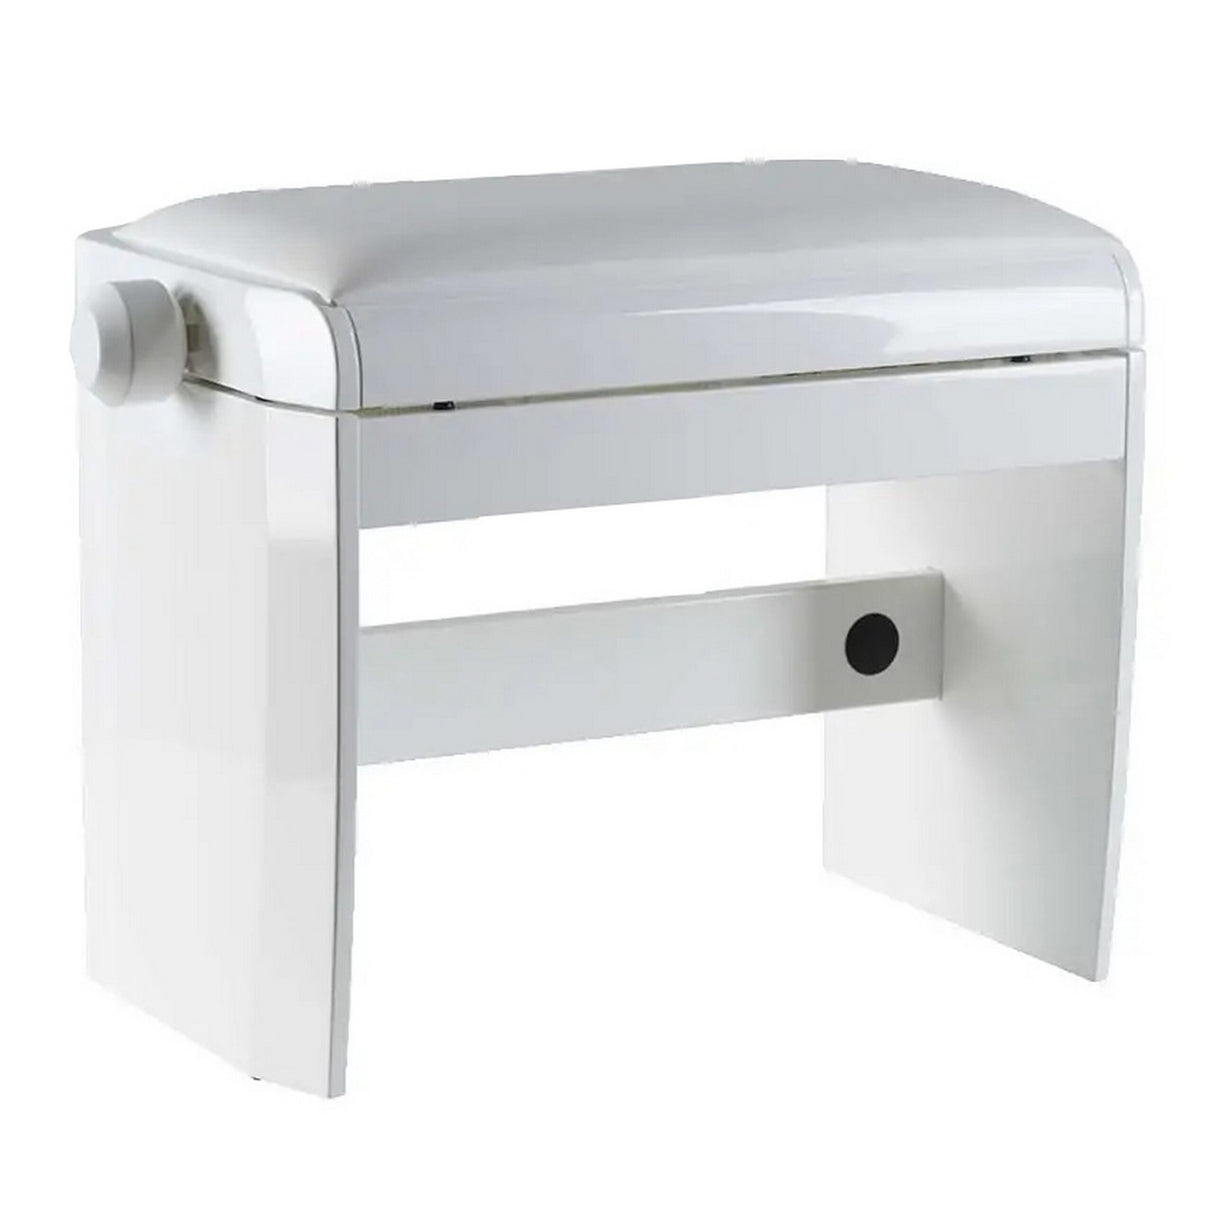 Dexibell PB90SBWWH Height Adjustable Wooden Bench, White Polished